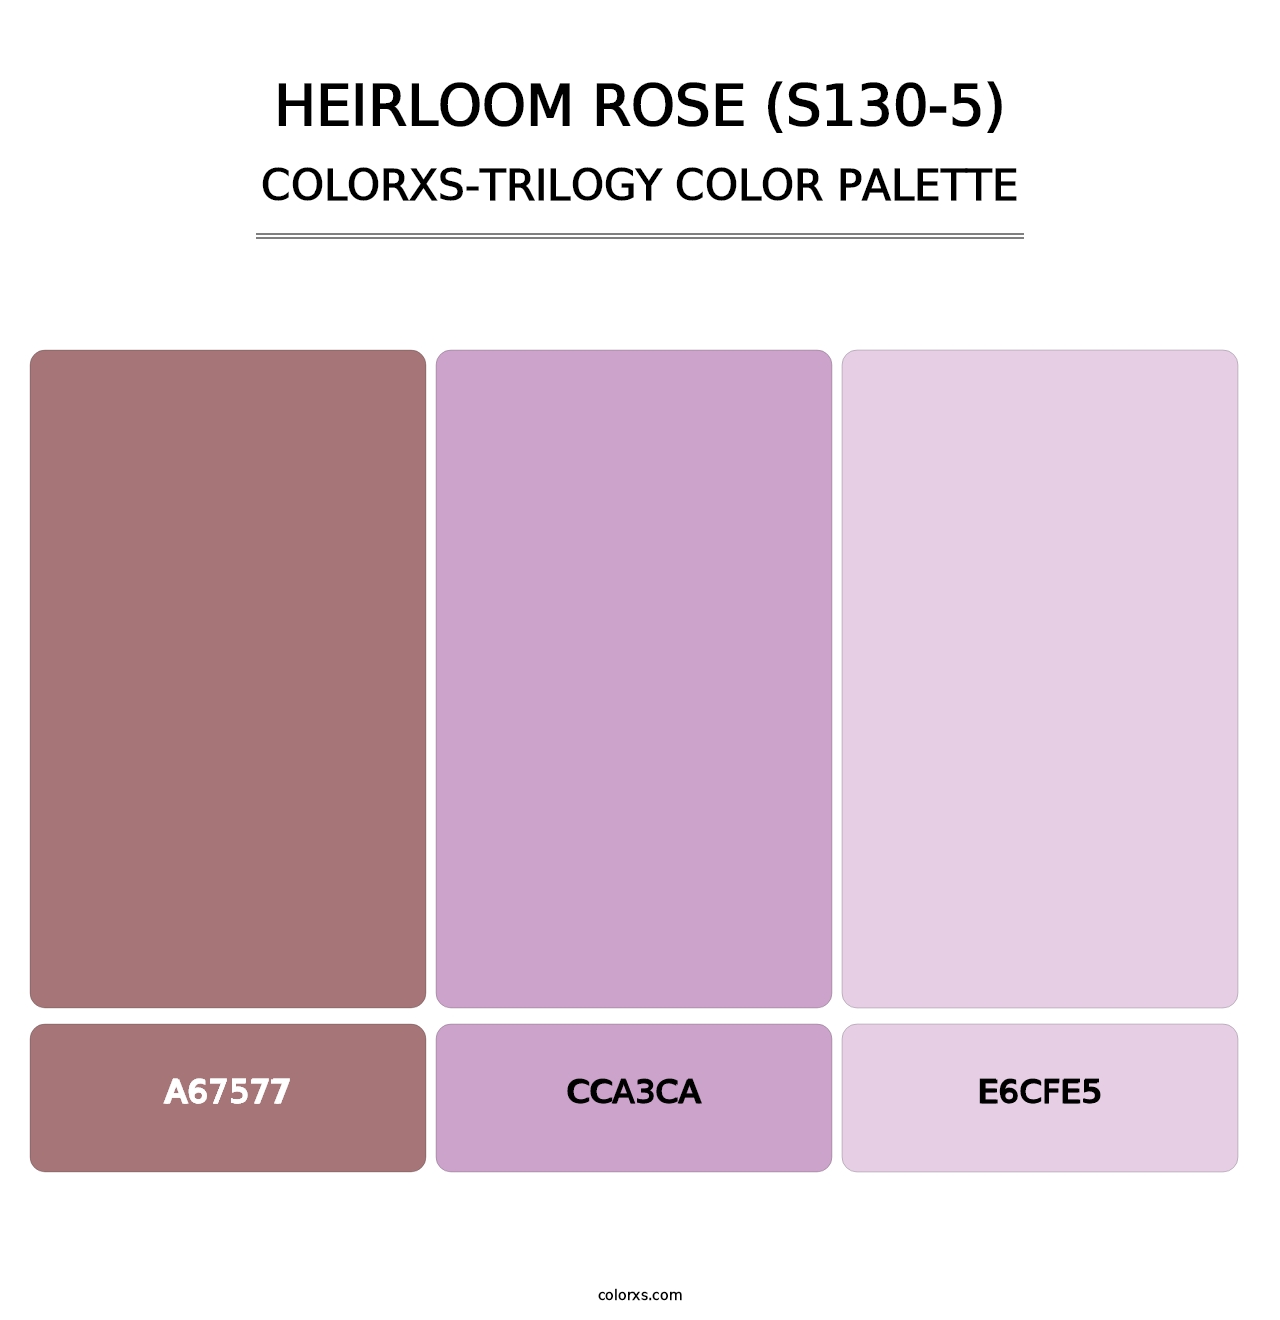 Heirloom Rose (S130-5) - Colorxs Trilogy Palette